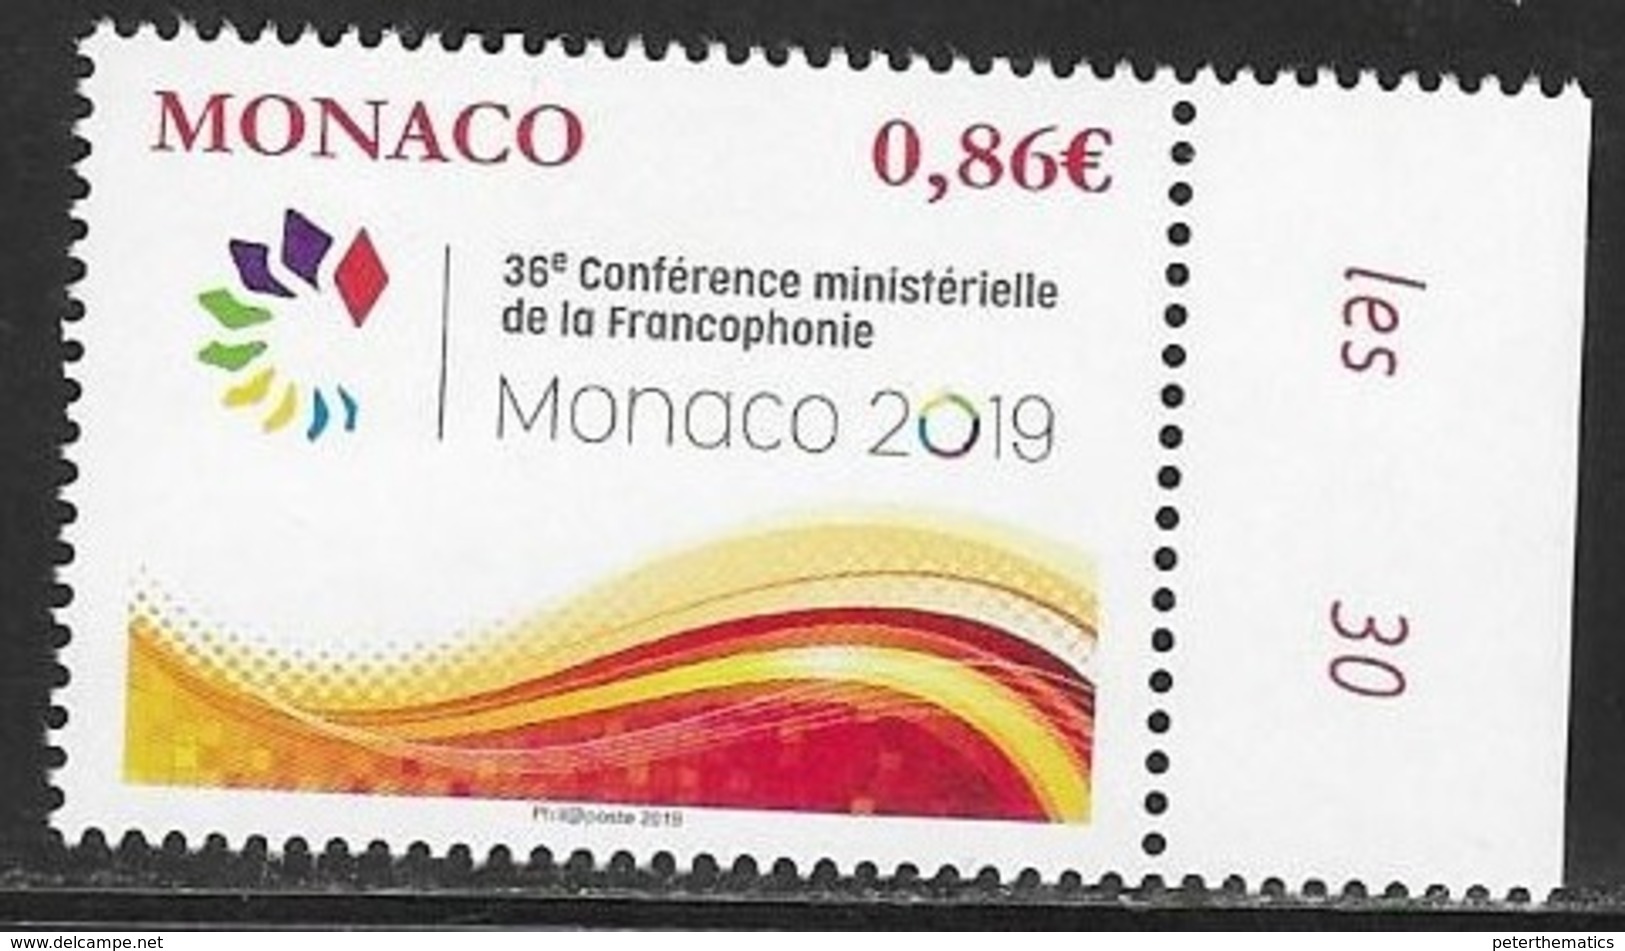 MONACO, 2019, MNH, FRACOPHONE CONFERENCE, 1v - Unclassified